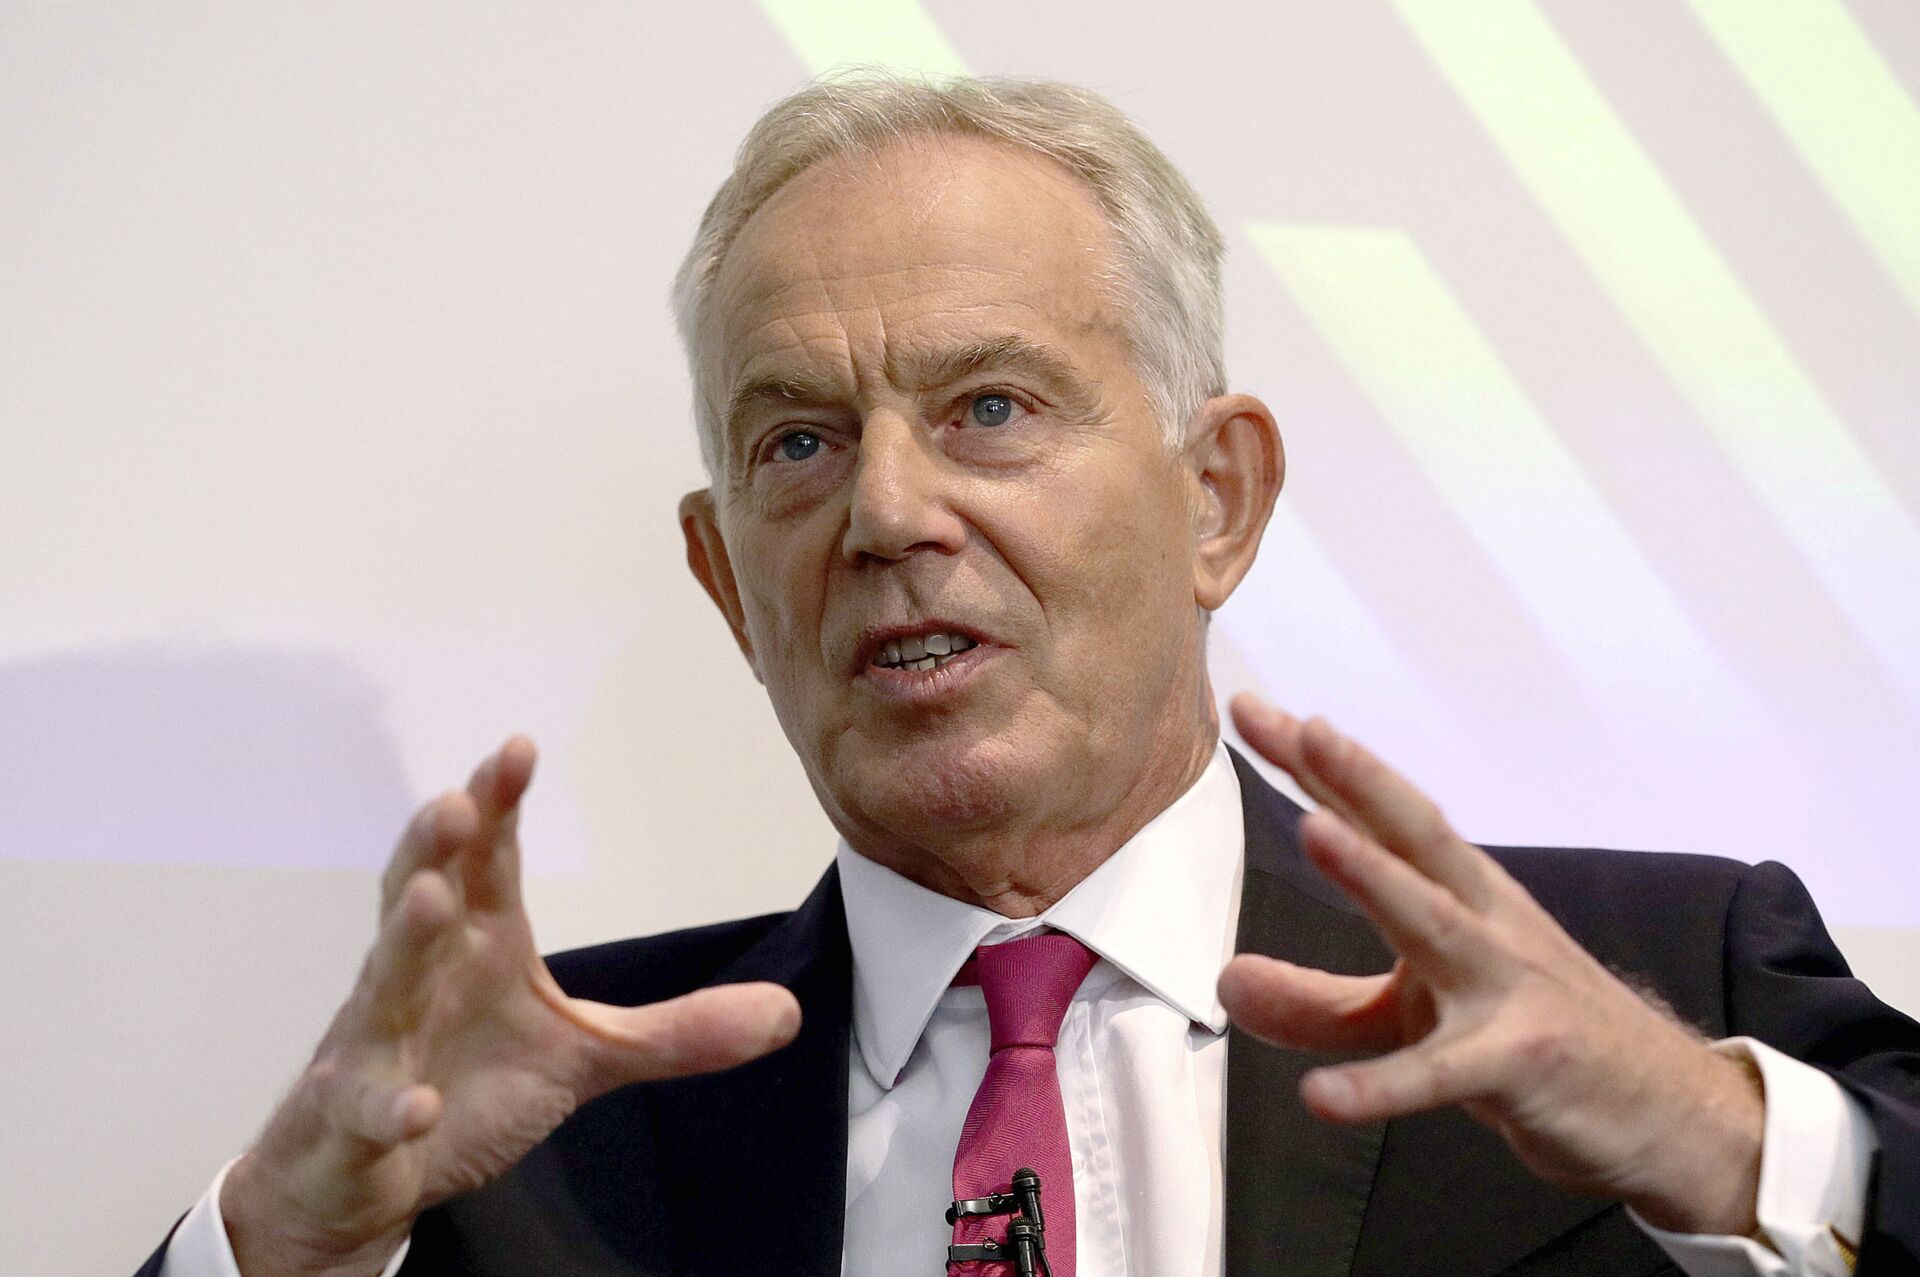 UK Labour Party Will 'Die' Without 'Total Deconstruction and Reconstruction', Tony Blair Claims - Sputnik International, 1920, 12.05.2021